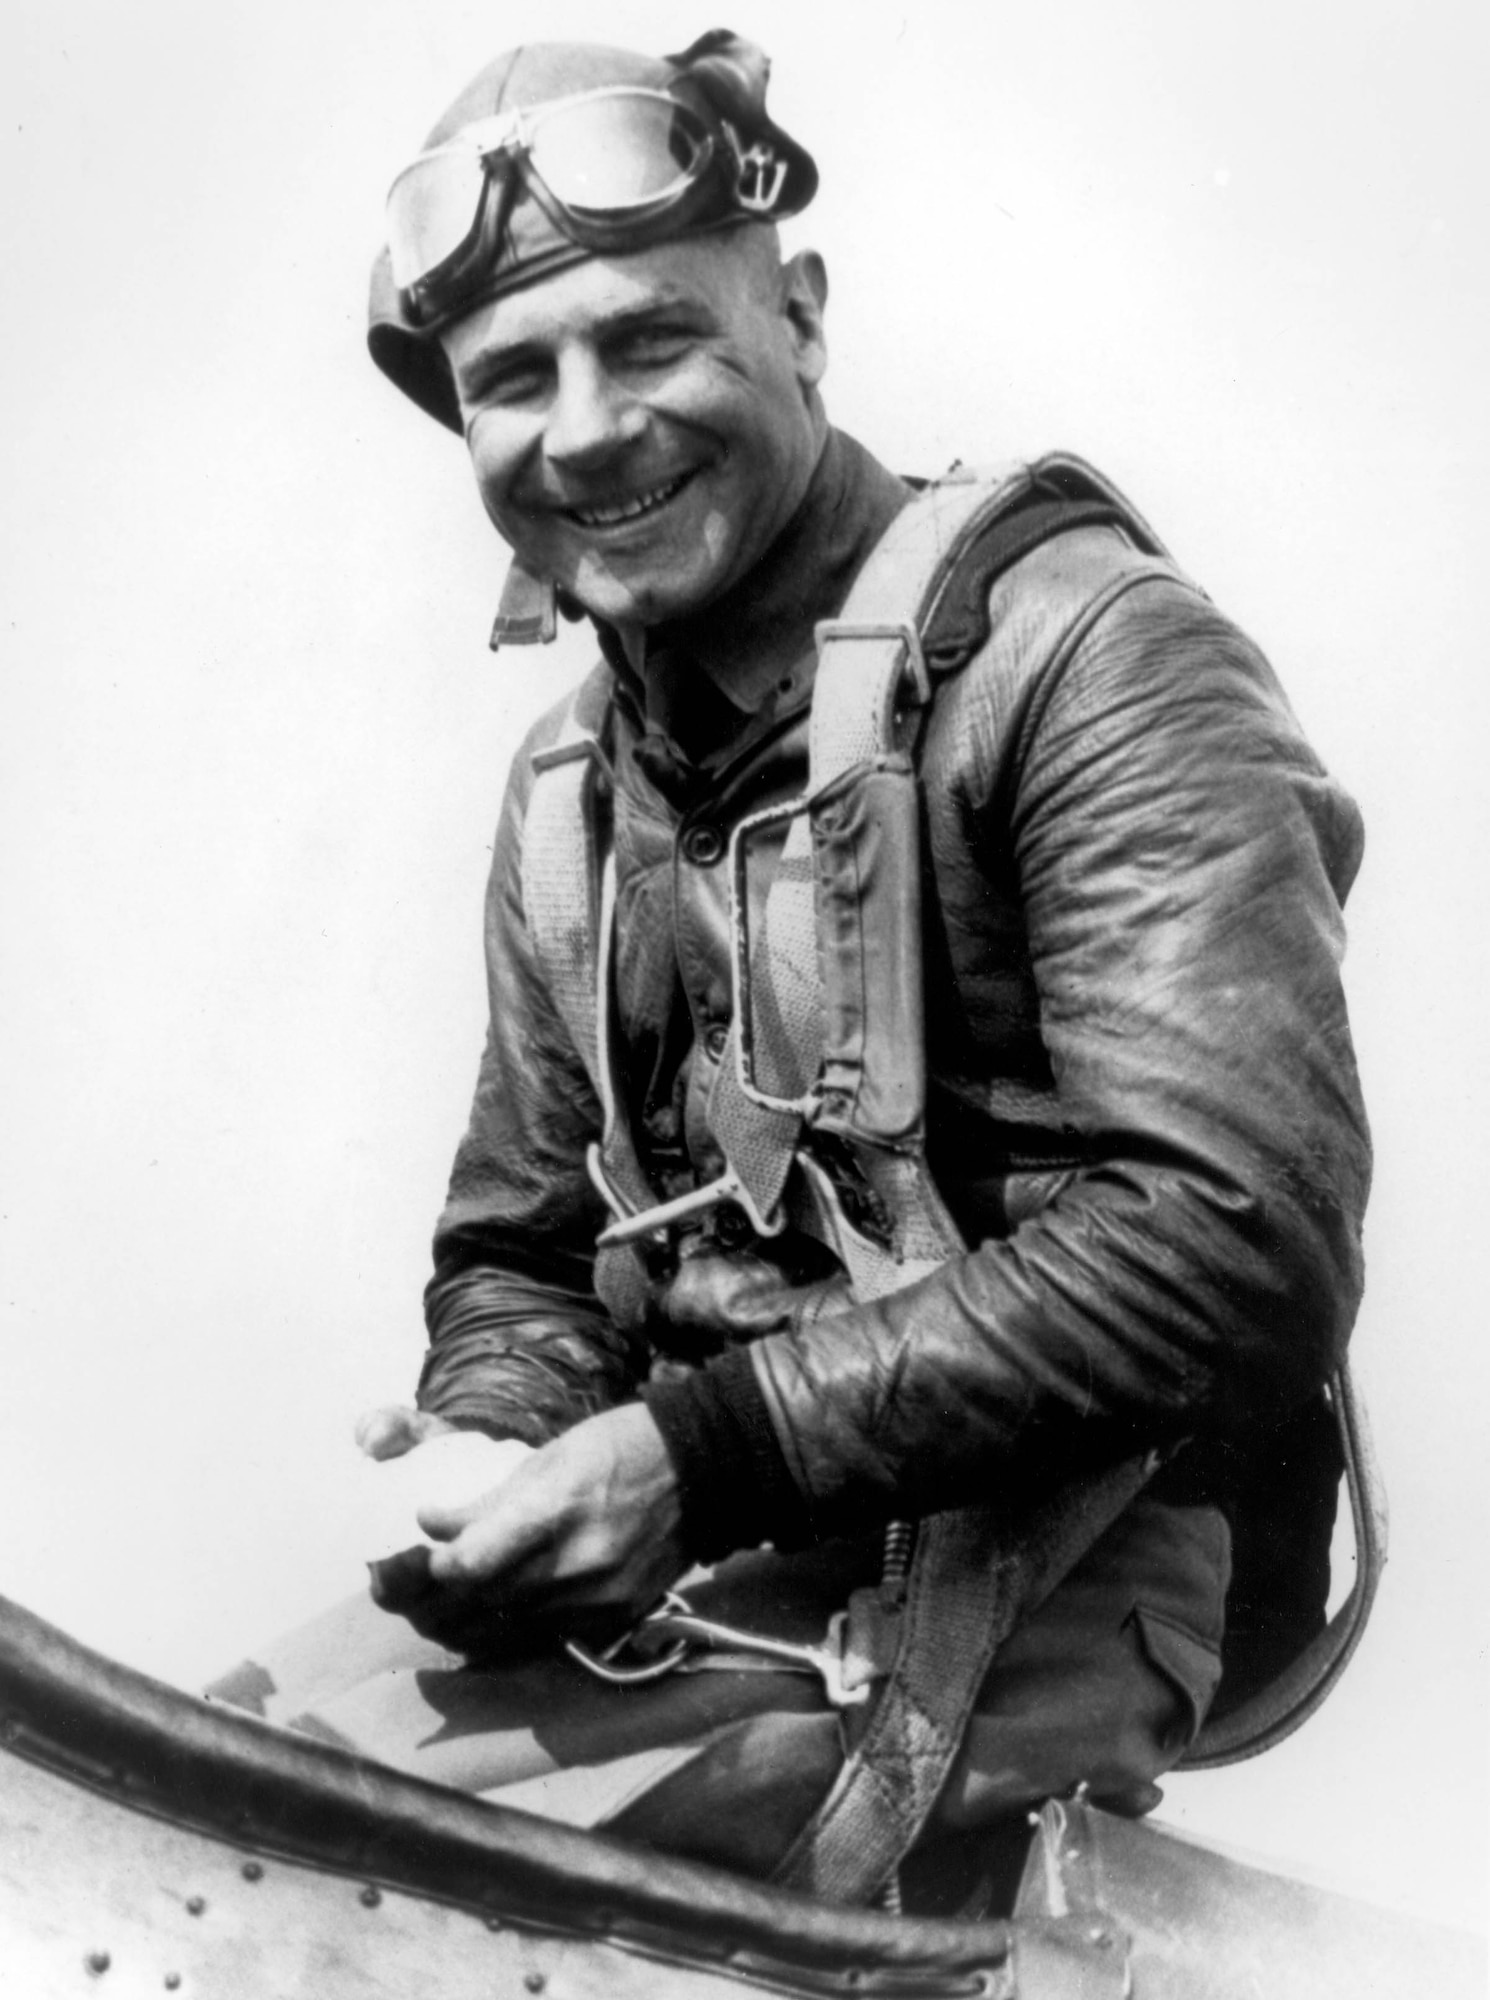 Lt. James H. "Jimmy" Doolittle, Doolittle made history as the first pilot to fly coast-to-coast in less than a day in a modified DeHavilland DH-4, in September 1922.  Equipped with crude navigational instruments, he traveled from Pablo Beach, Fla., to San Diego, Calif., in 21 hours and 19 minutes. He made only one refueling stop at Kelly Field. The military gave him the Distinguished Flying Cross for this historic feat. (U.S. Air Force photo)
